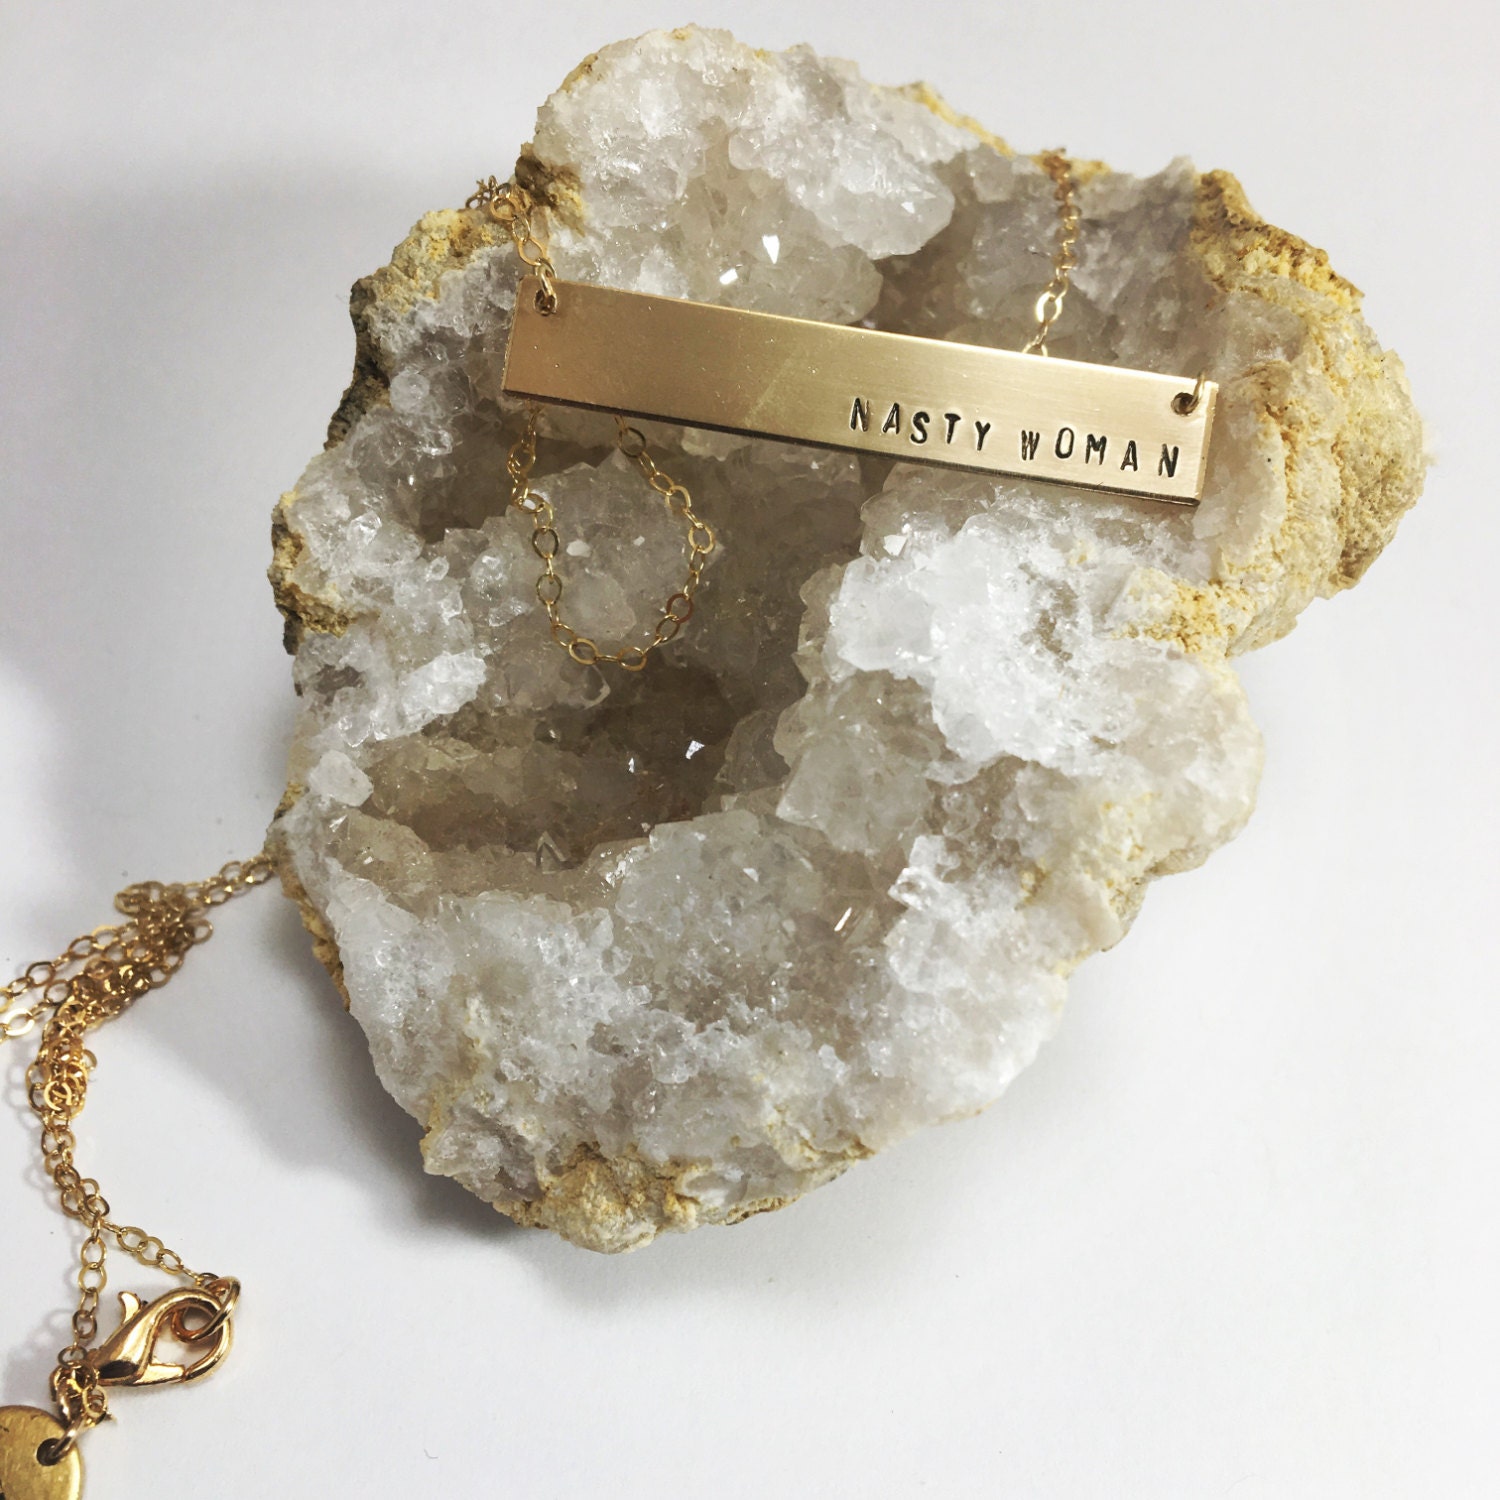 Nasty Woman GOLD FILL Necklace// Nasty Woman STERLING necklace//gold bar necklace//silver bar necklace//nasty woman gold bar//silver bar//